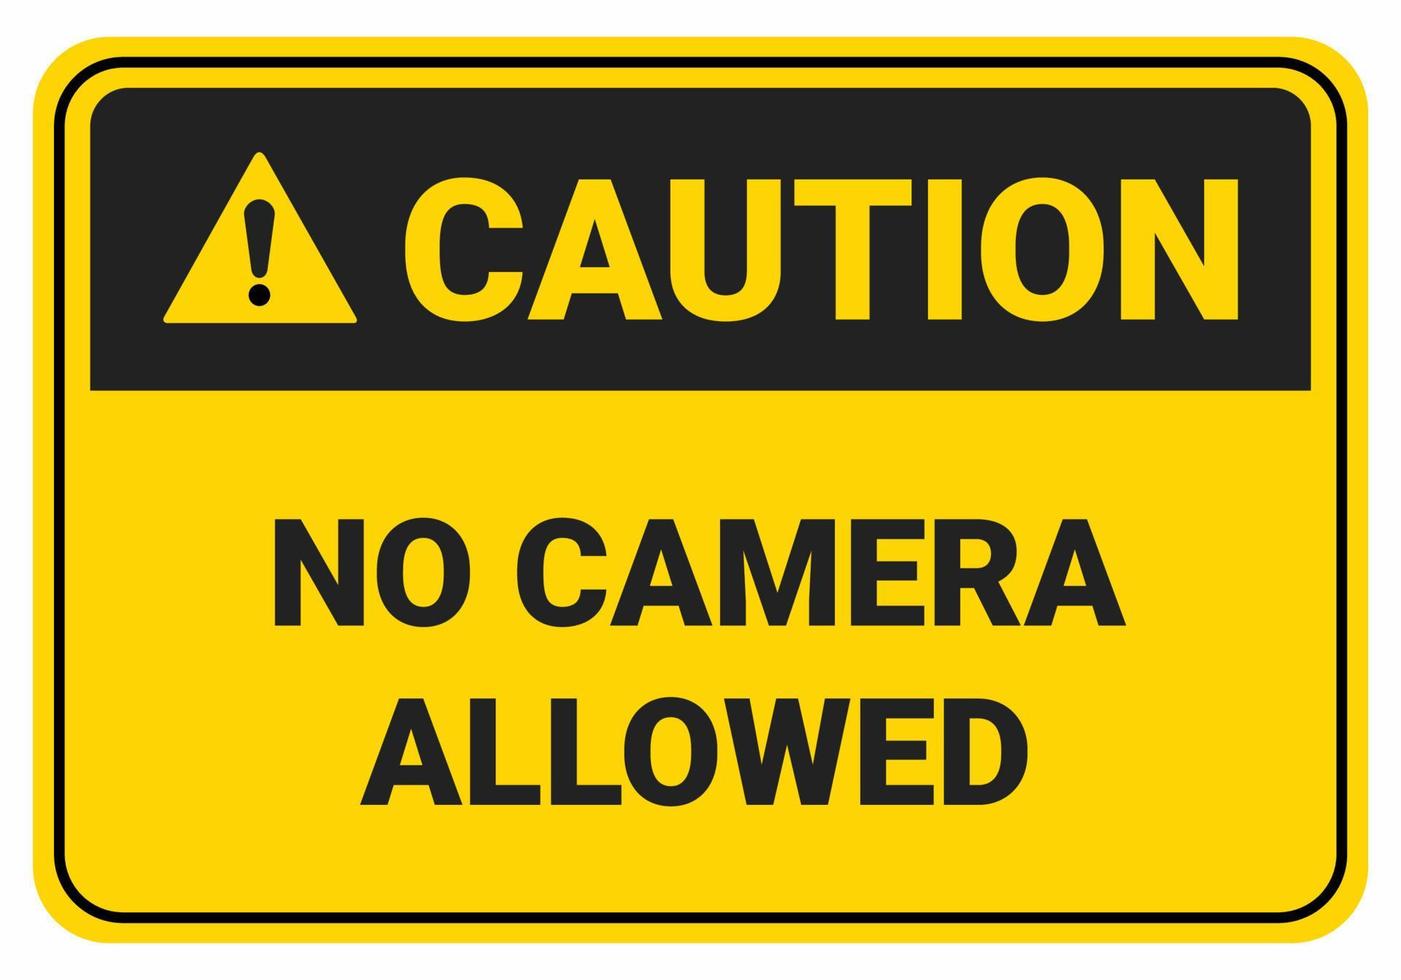 Caution No camera allowed. Safety sign Vector Illustration. OSHA and ANSI standard sign. eps10